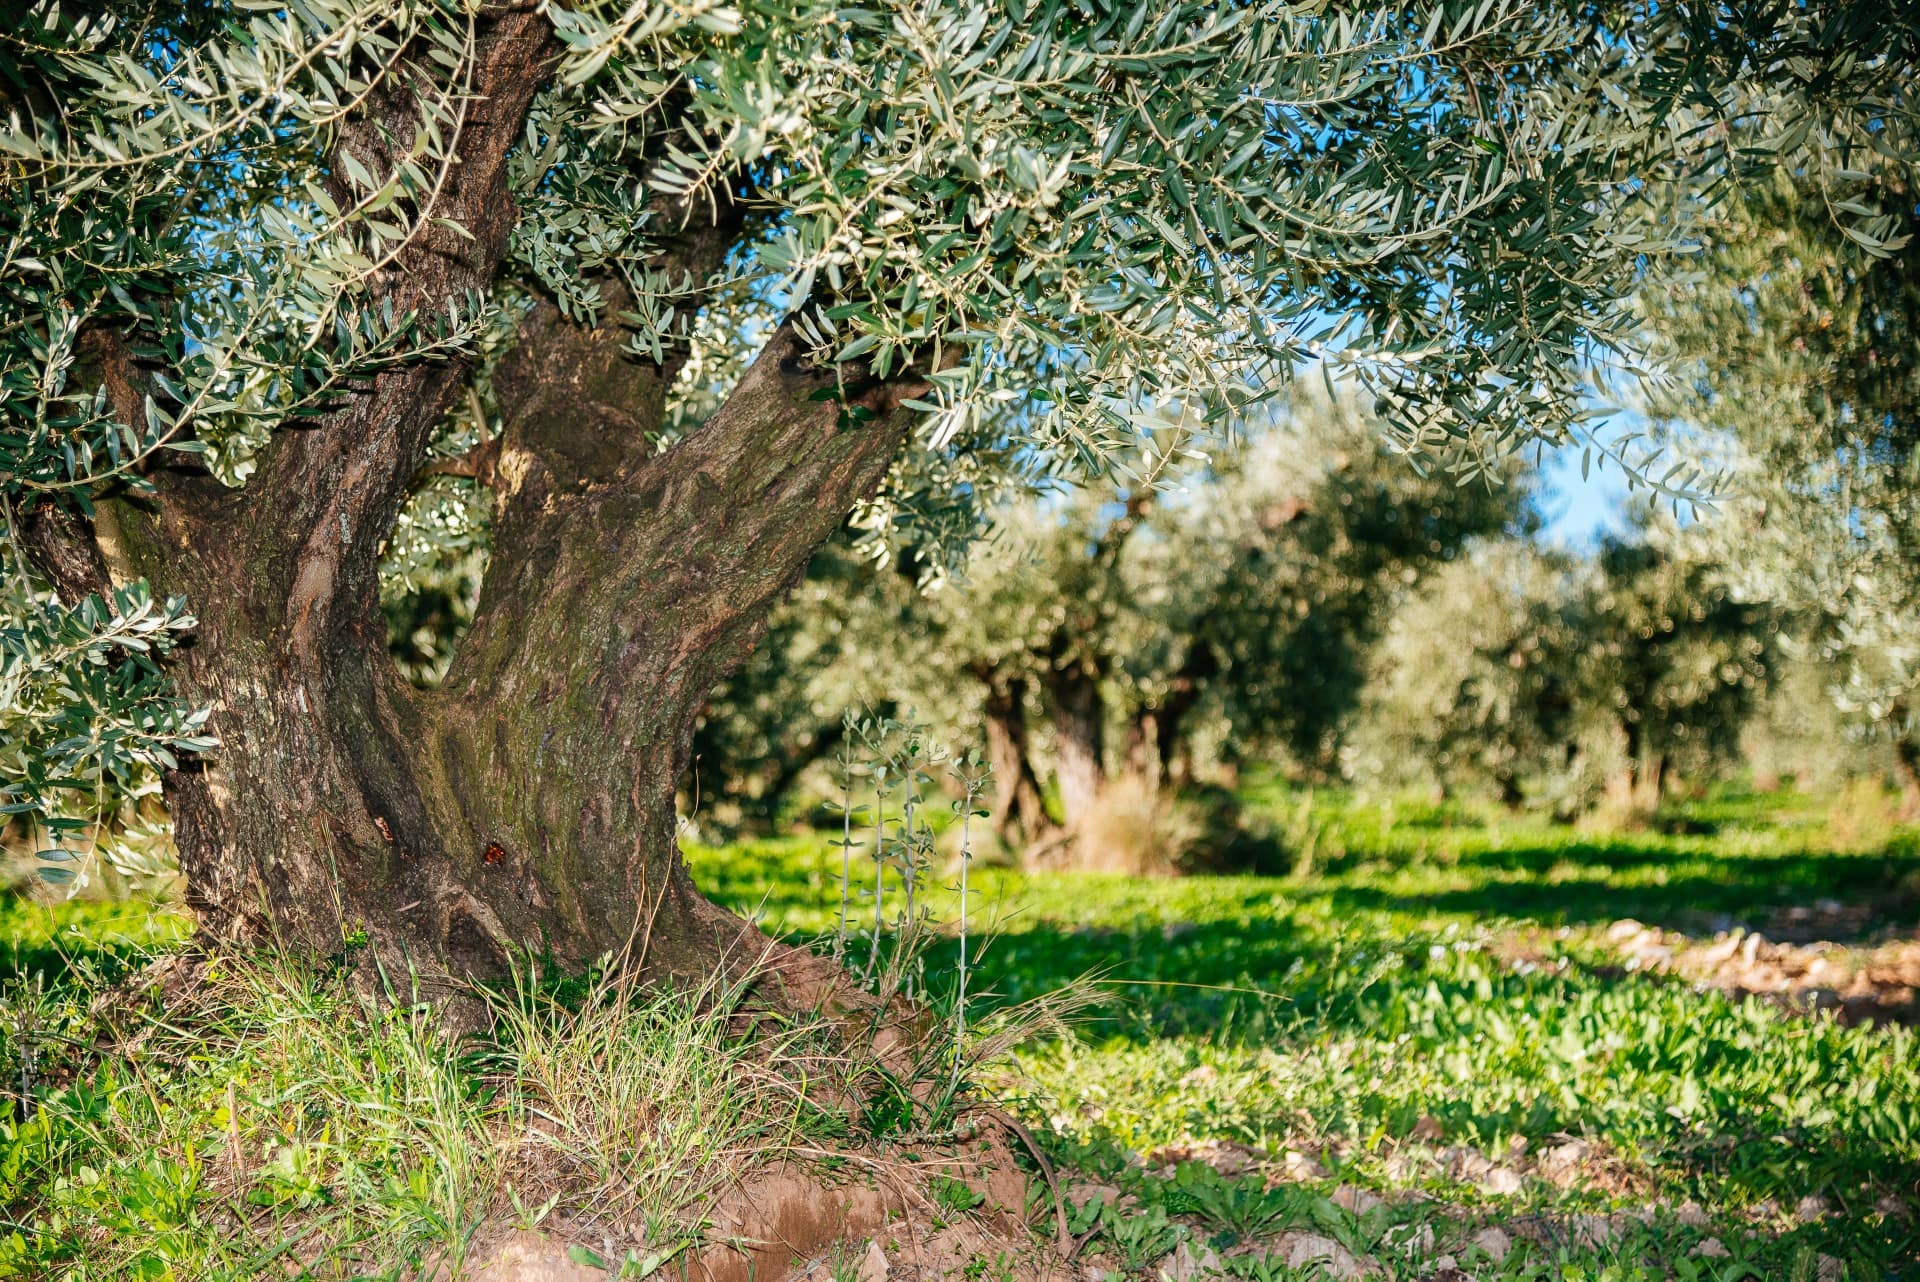 europe-profiles-production-the-best-olive-oils-a-family-tradition-takes-root-at-moulin-de-la-coquille-olive-oil-times